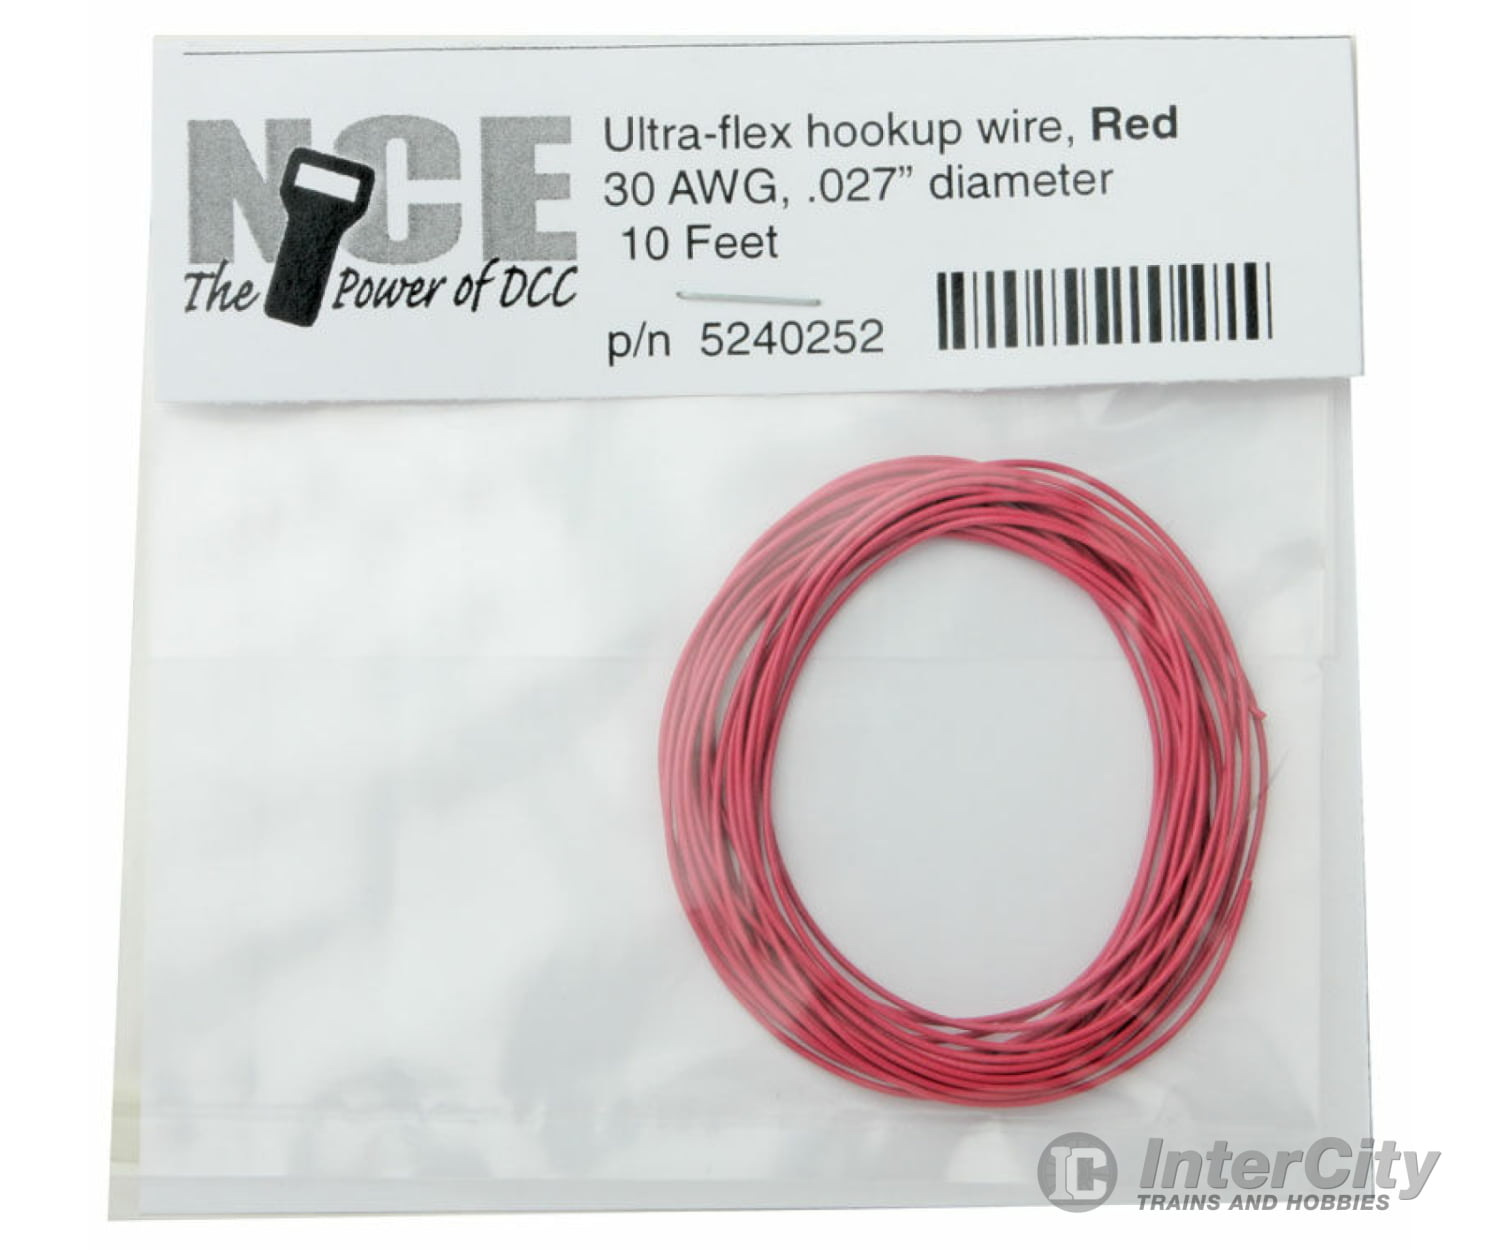 Nce 252 Ultraflex Hook-Up 32Awg.023 Diameter Wire -- Red 10’ 3.05M Dcc Accessories